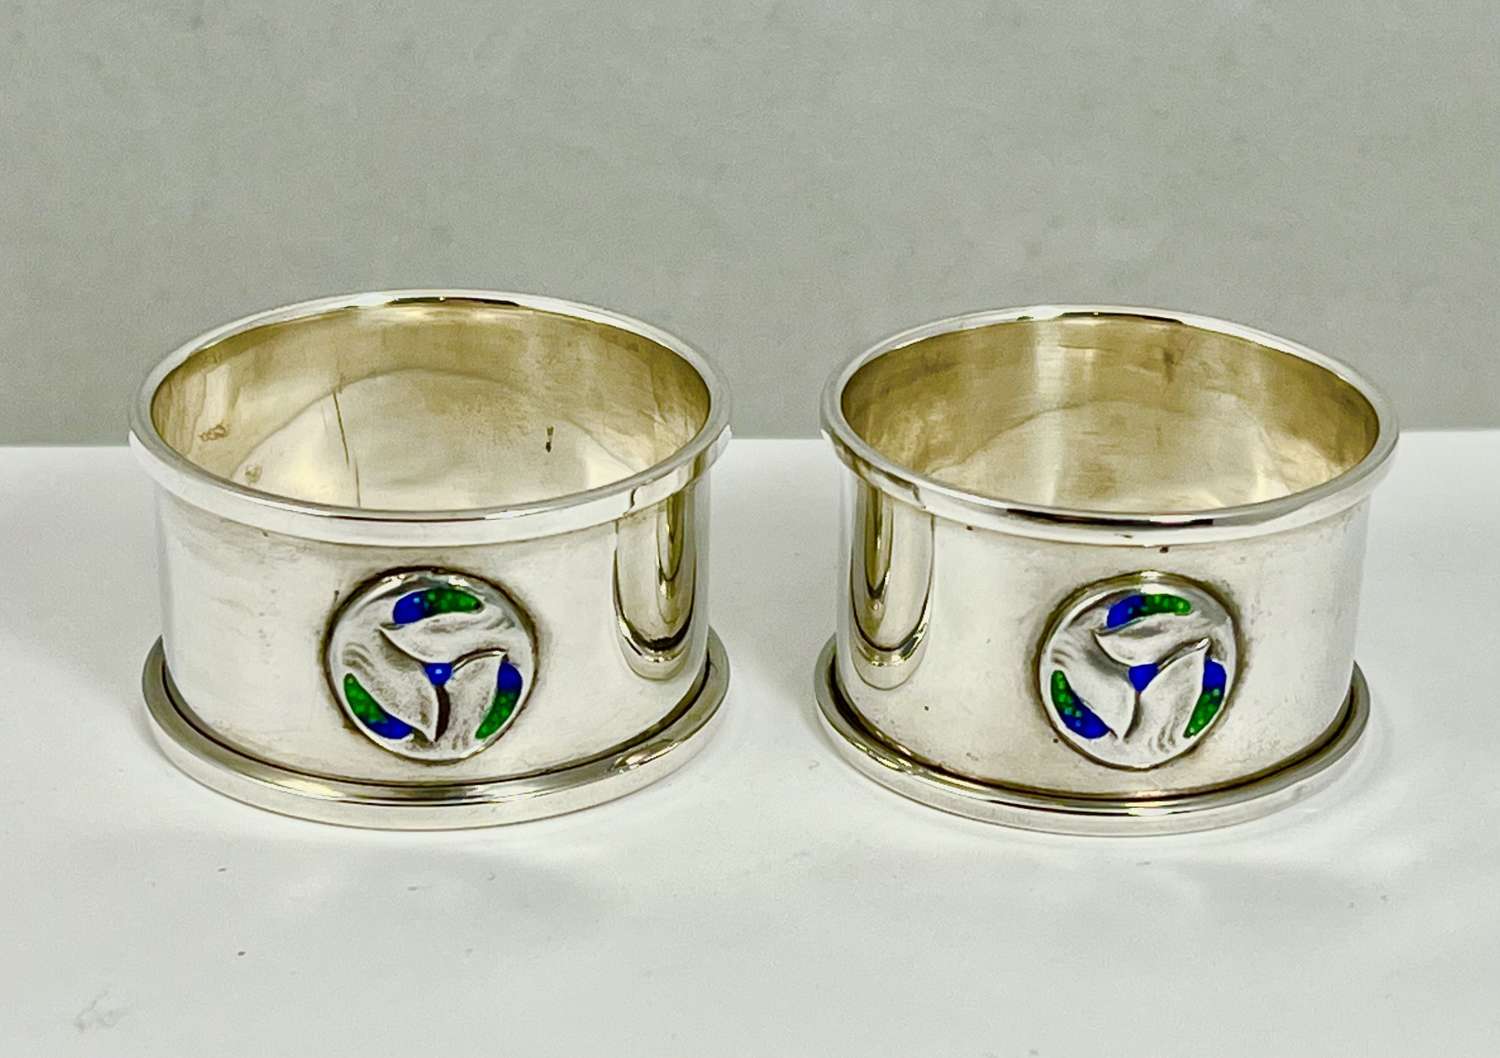 Art Nouveau silver and enamel pair of napkin rings by W.H.Haseler